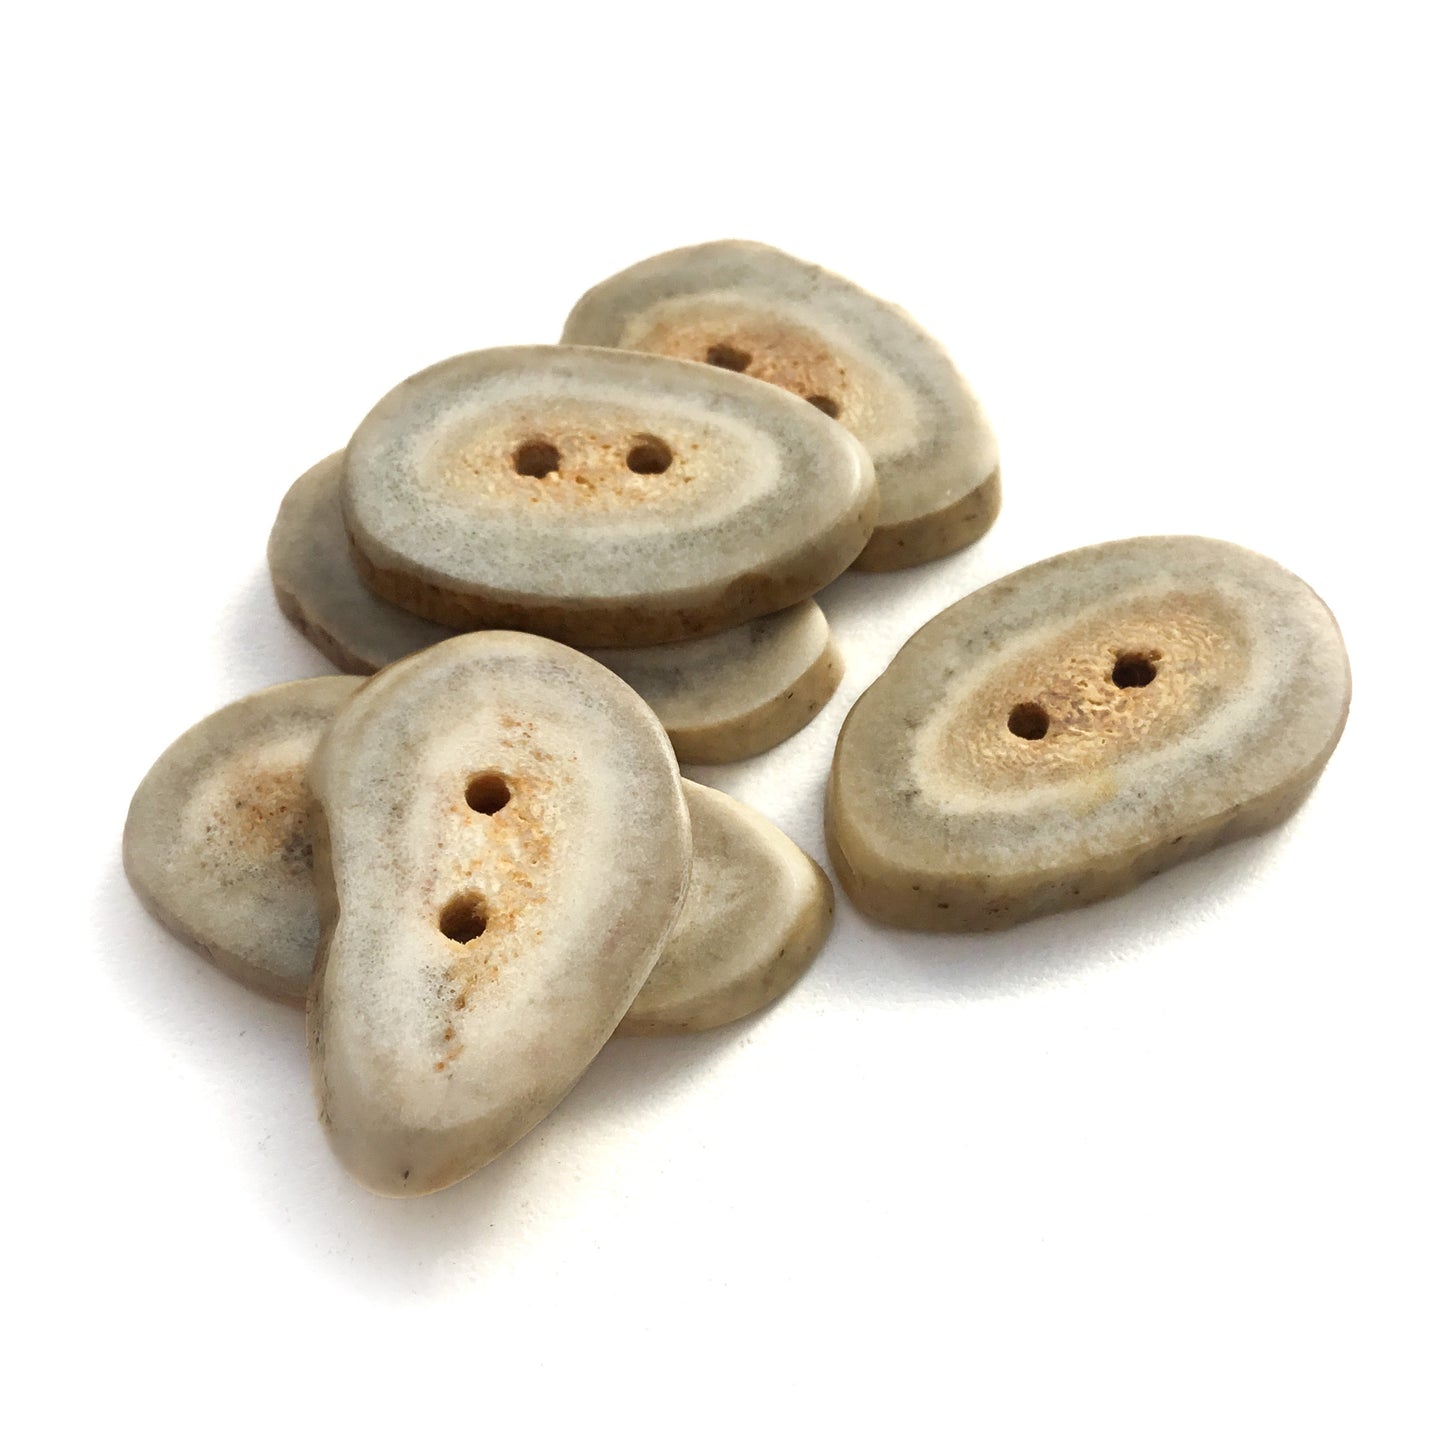 Deer Antler Shed Buttons  3/4" x 1-1/4"